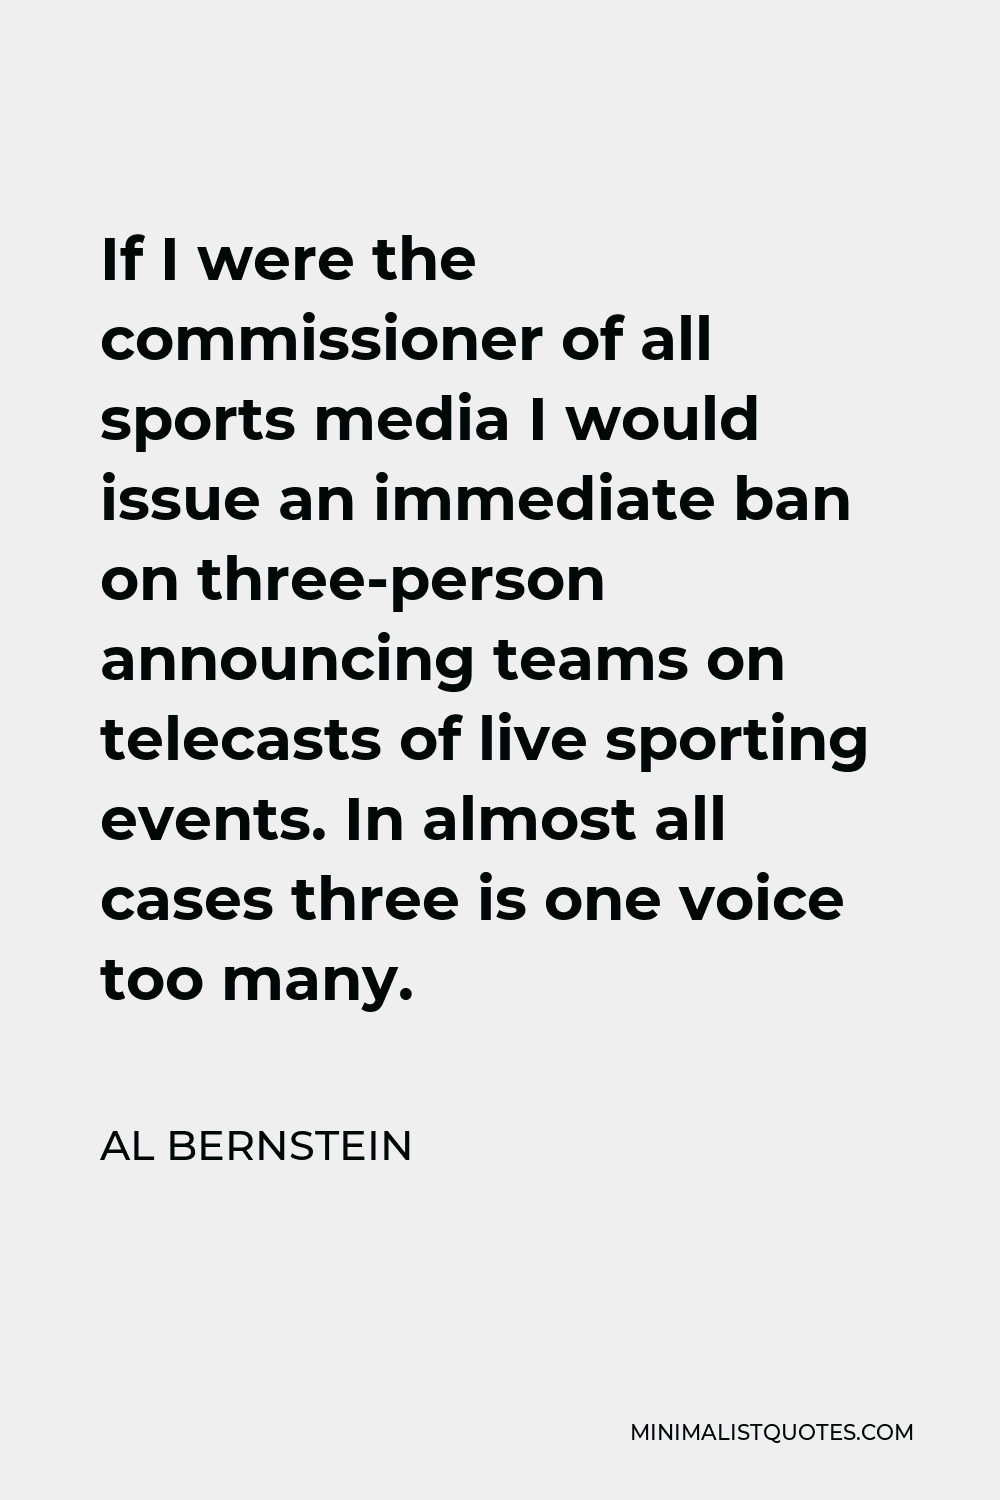 Al Bernstein Quote - If I were the commissioner of all sports media I would issue an immediate ban on three-person announcing teams on telecasts of live sporting events. In almost all cases three is one voice too many.